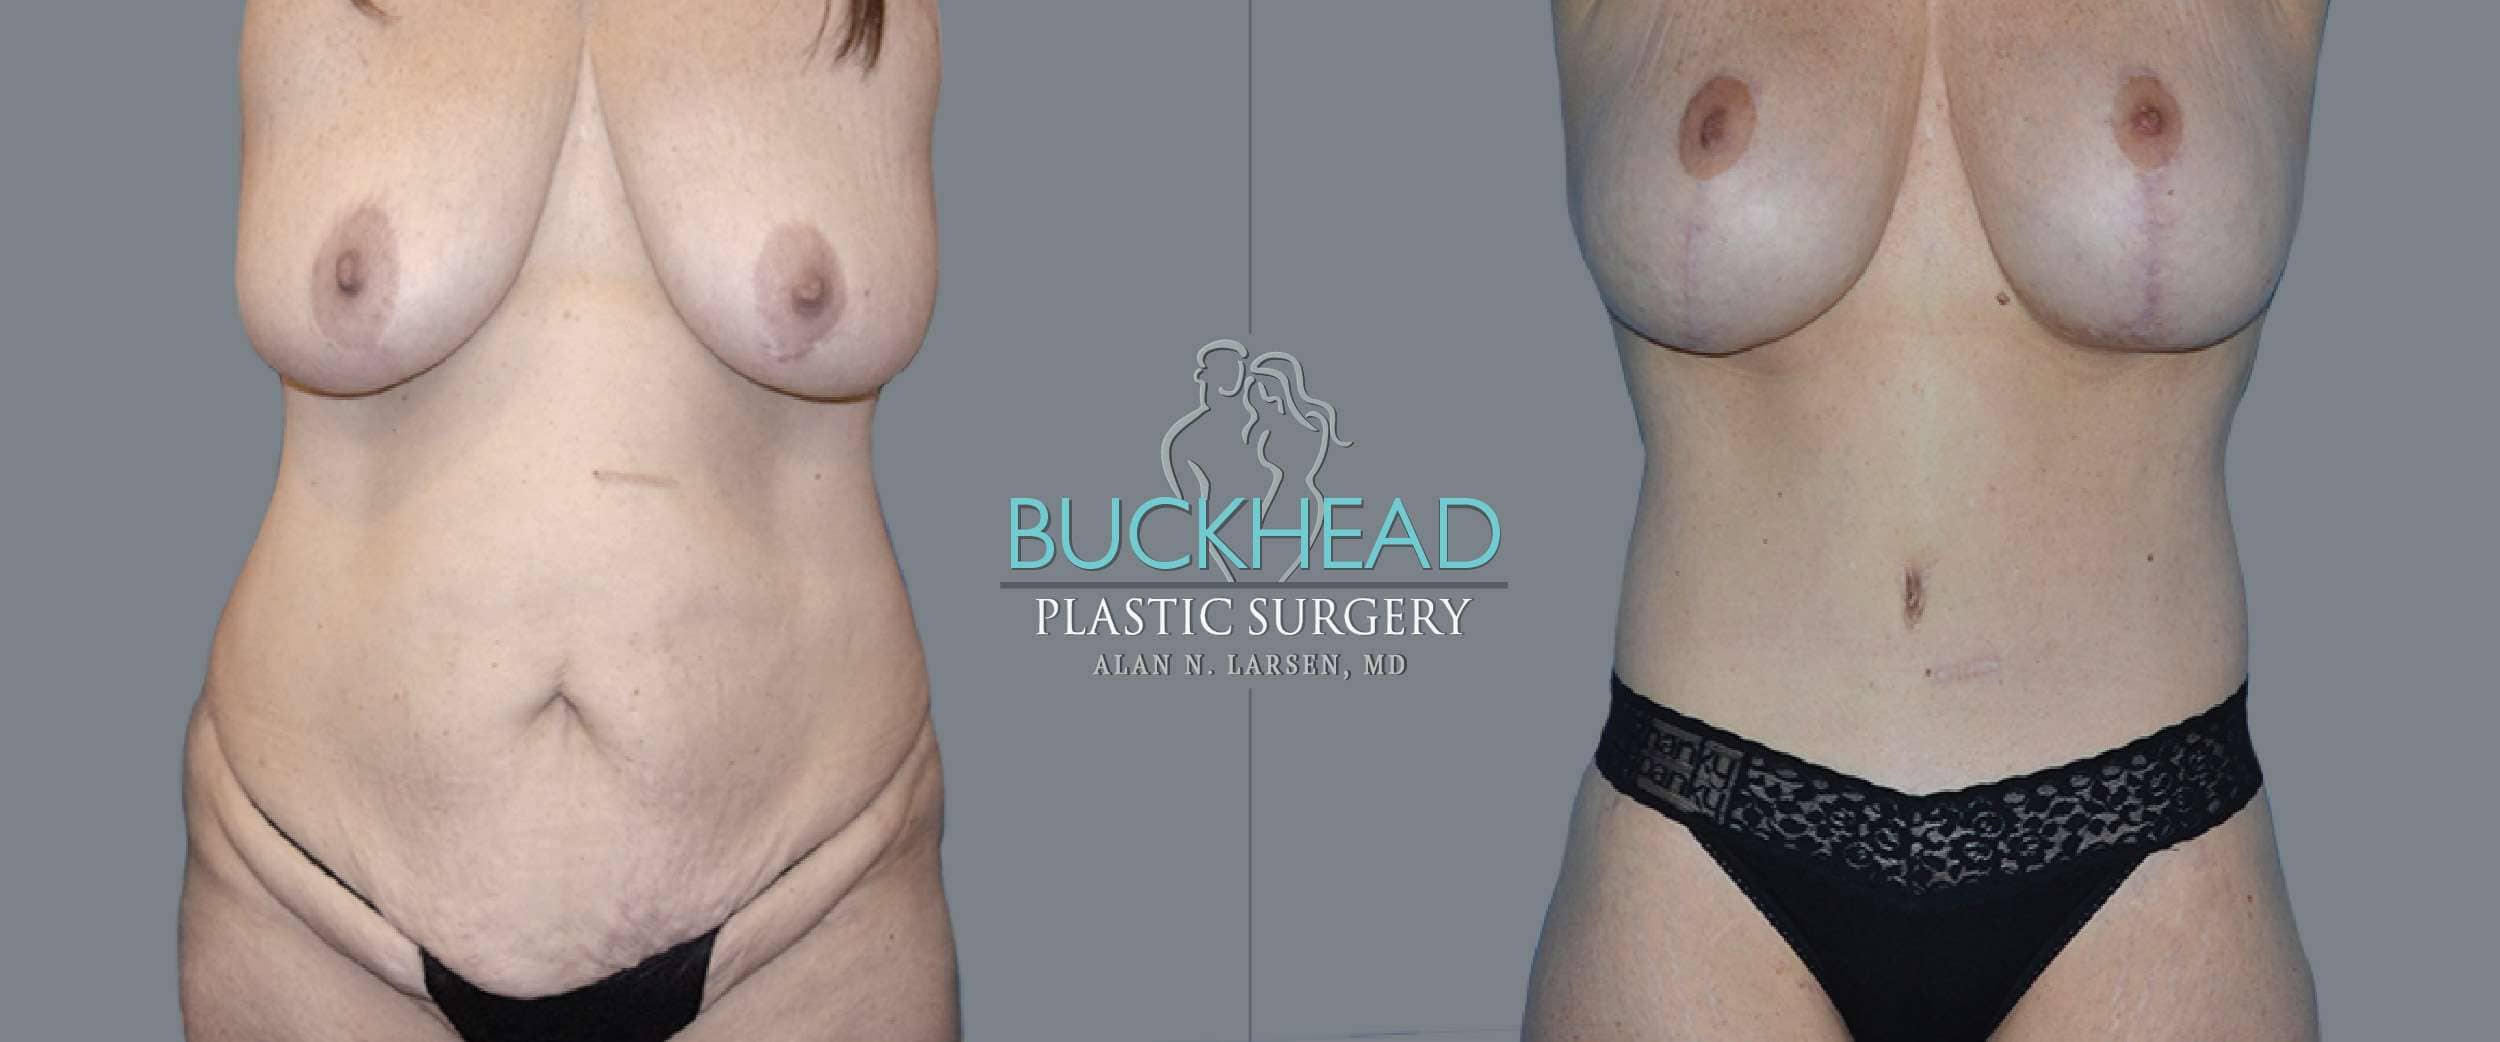 Before and After Photo gallery | Body Lift | Buckhead Plastic Surgery | Double Board-Certified Plastic Surgeon in Atlanta GA